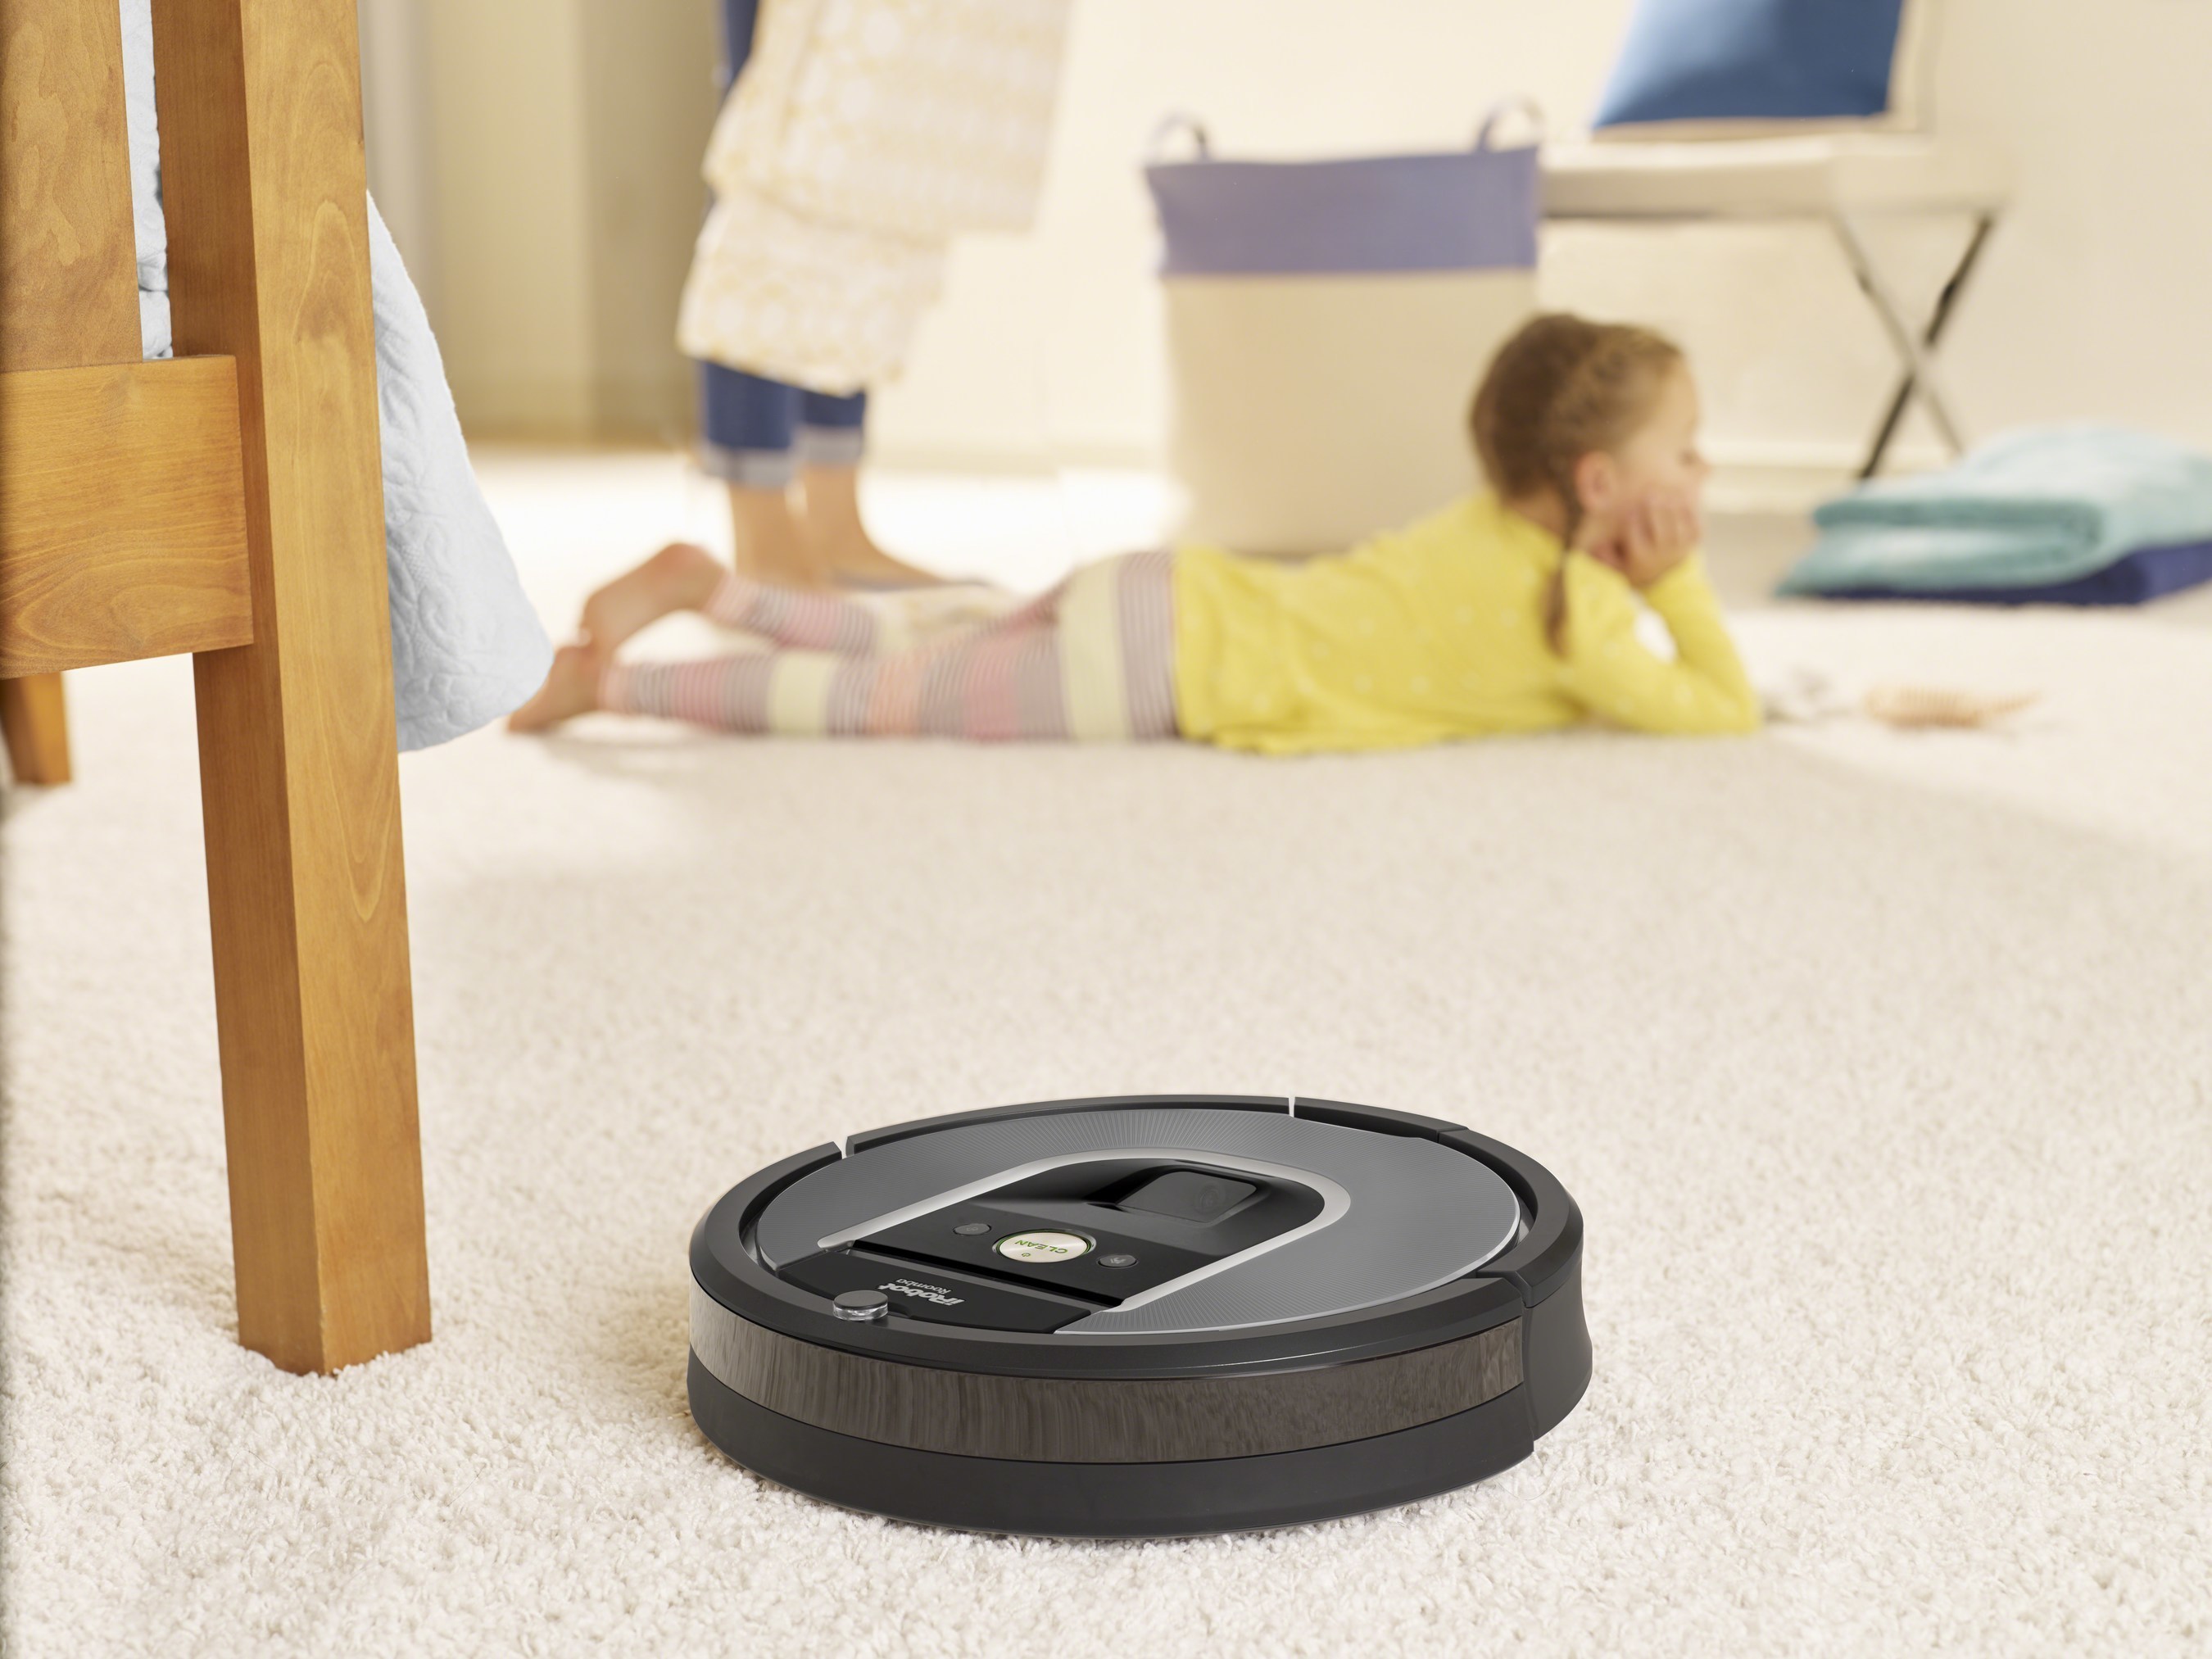 iRobot Roomba 960 Vacuuming Robot helps keep floors cleaner throughout the entire home with intelligent visual navigation, iRobot HOME App control, and 5x the air power over previous generation Roomba vacuum cleaners.